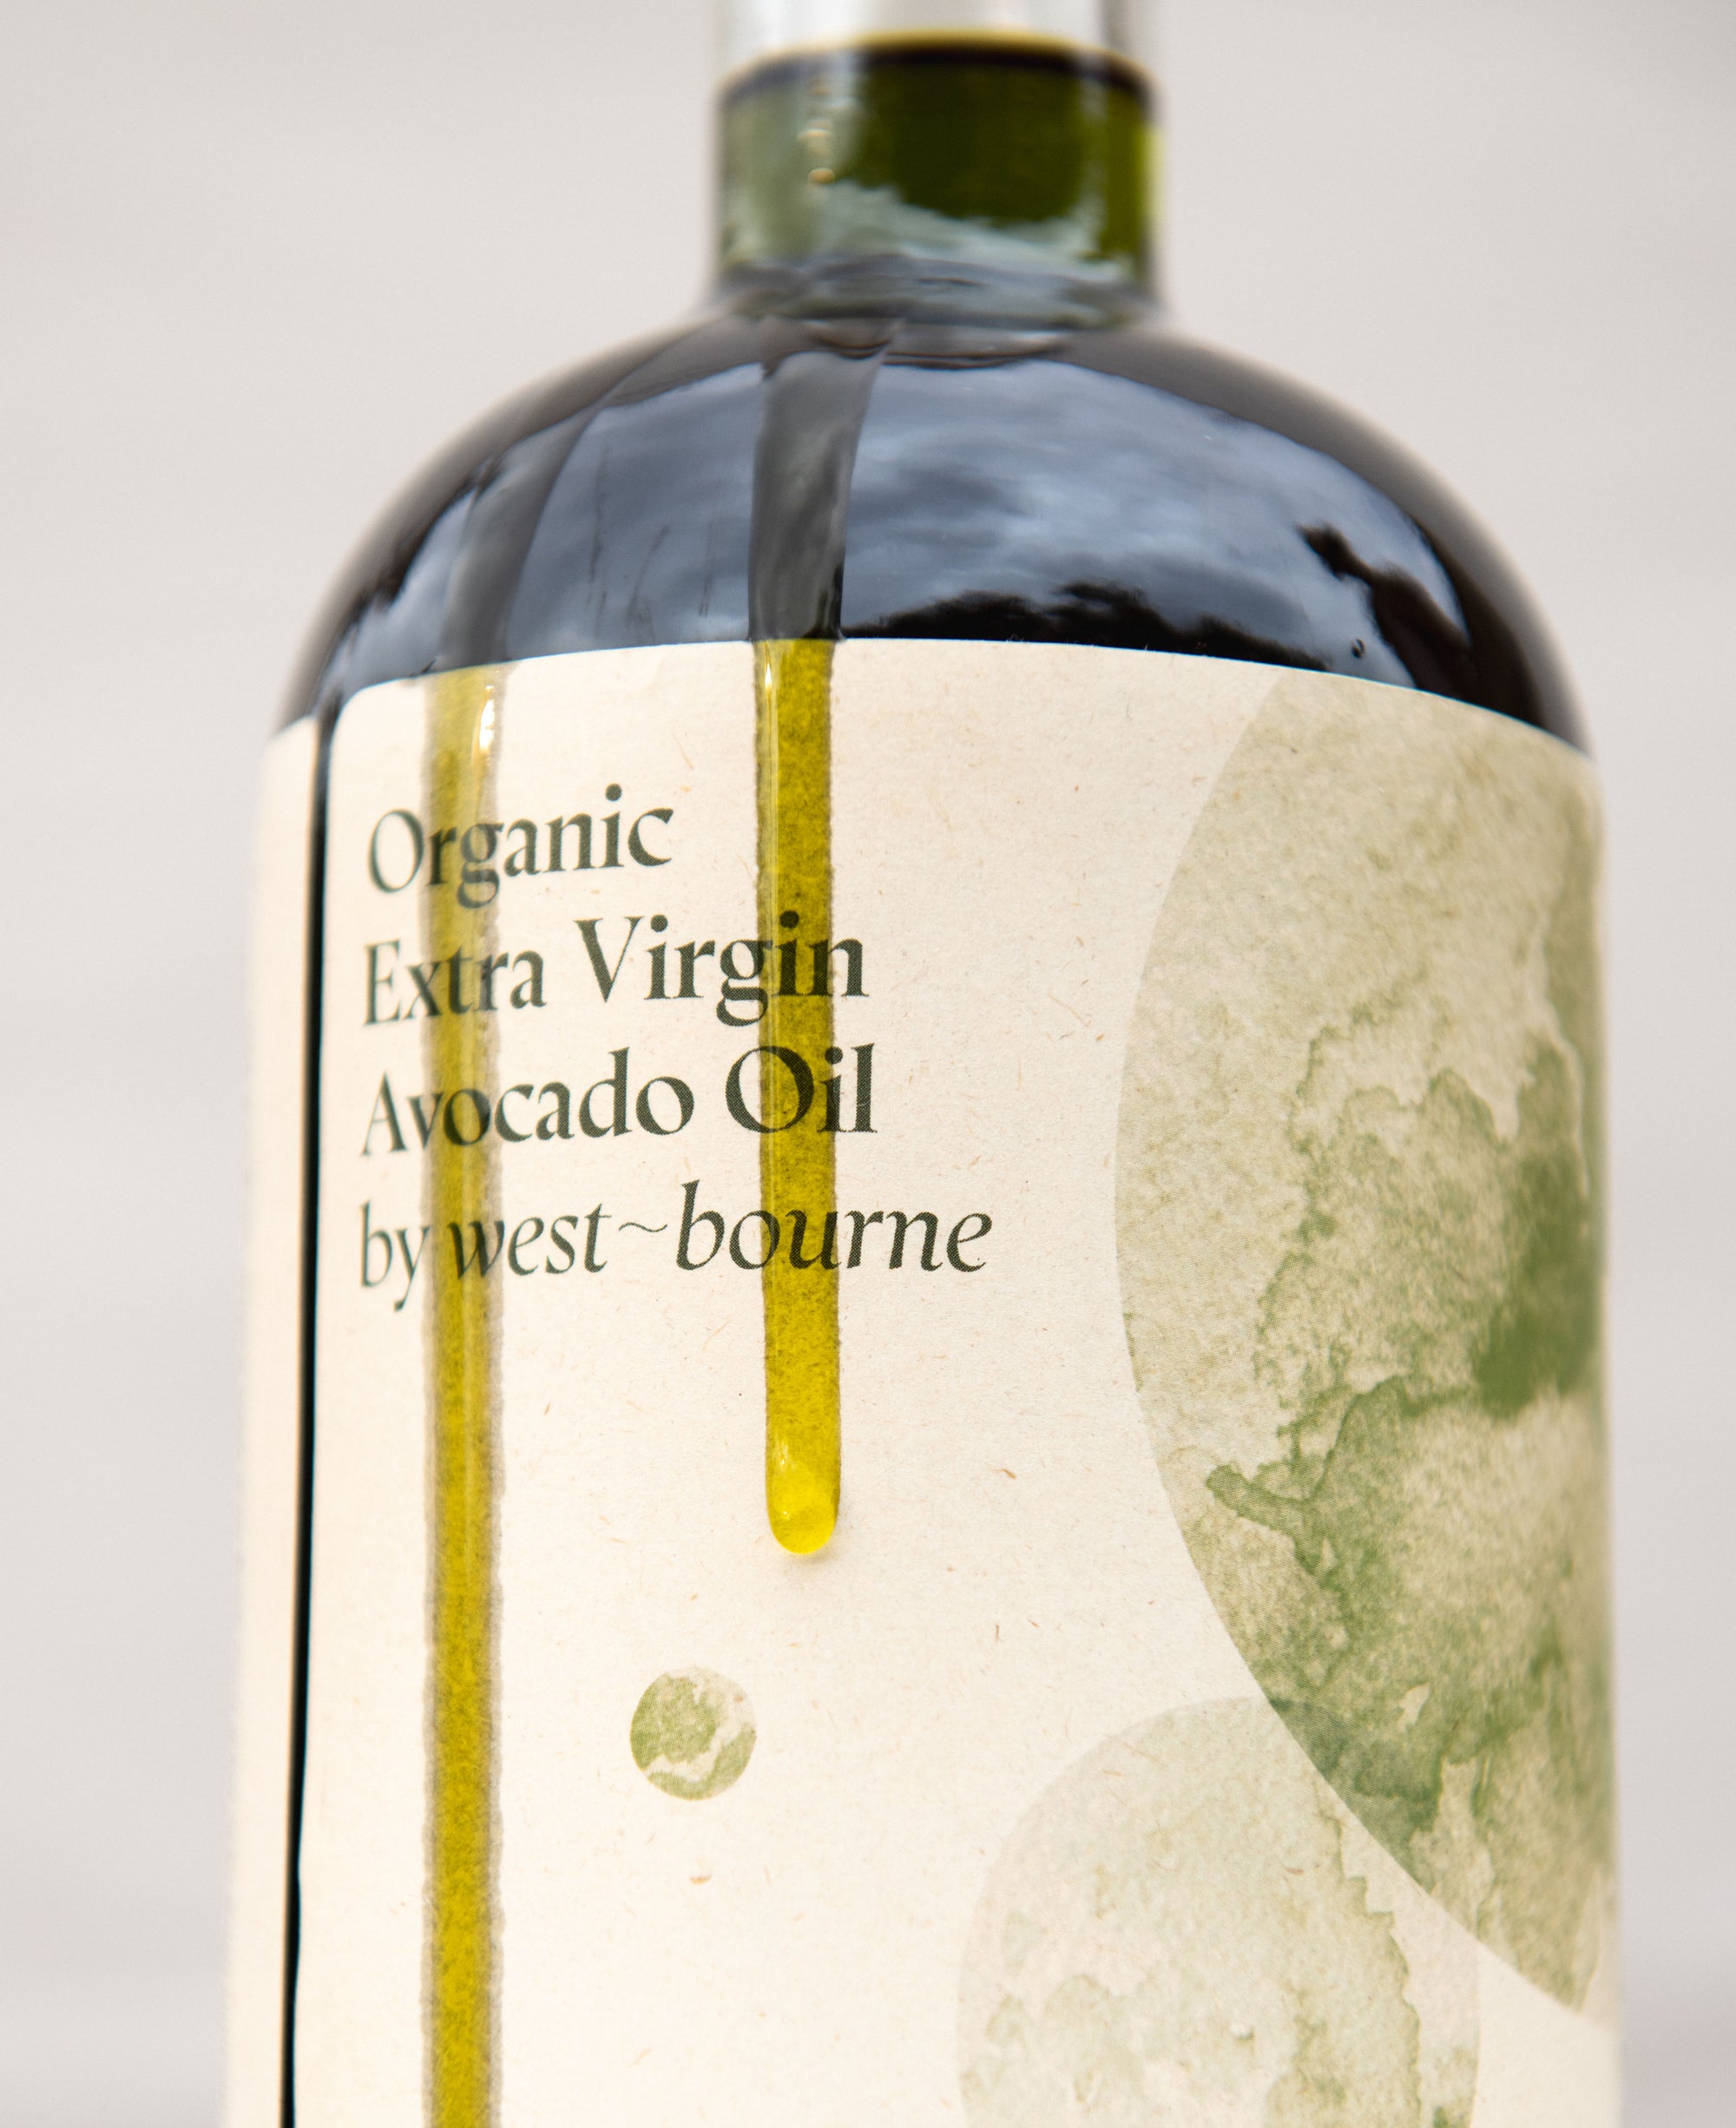 See Organic Extra Virgin Avocado Oil Product Page